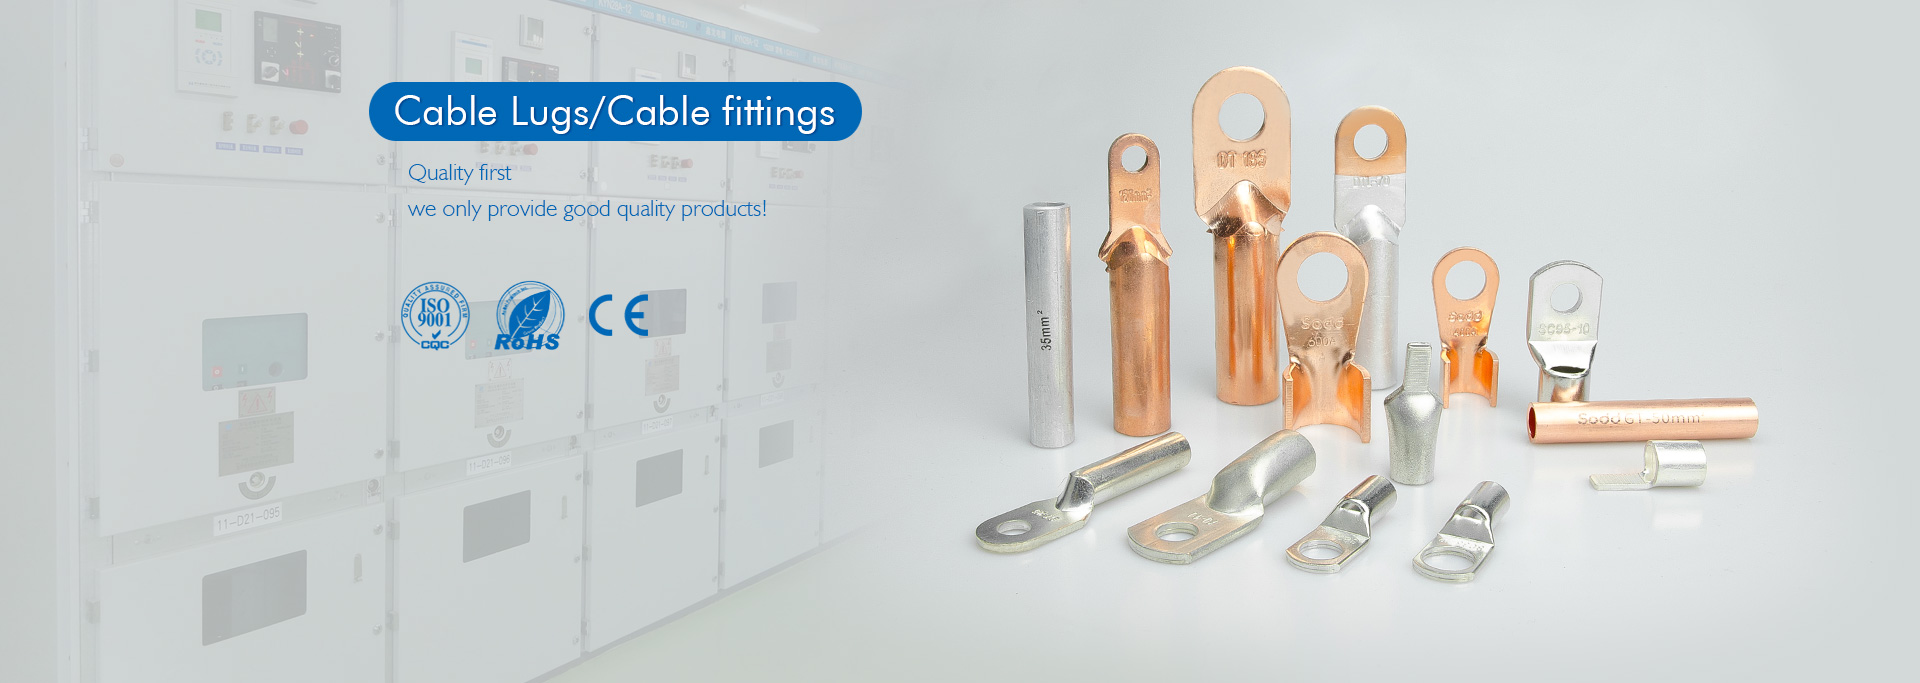 Cable Lugs/Cable fittings